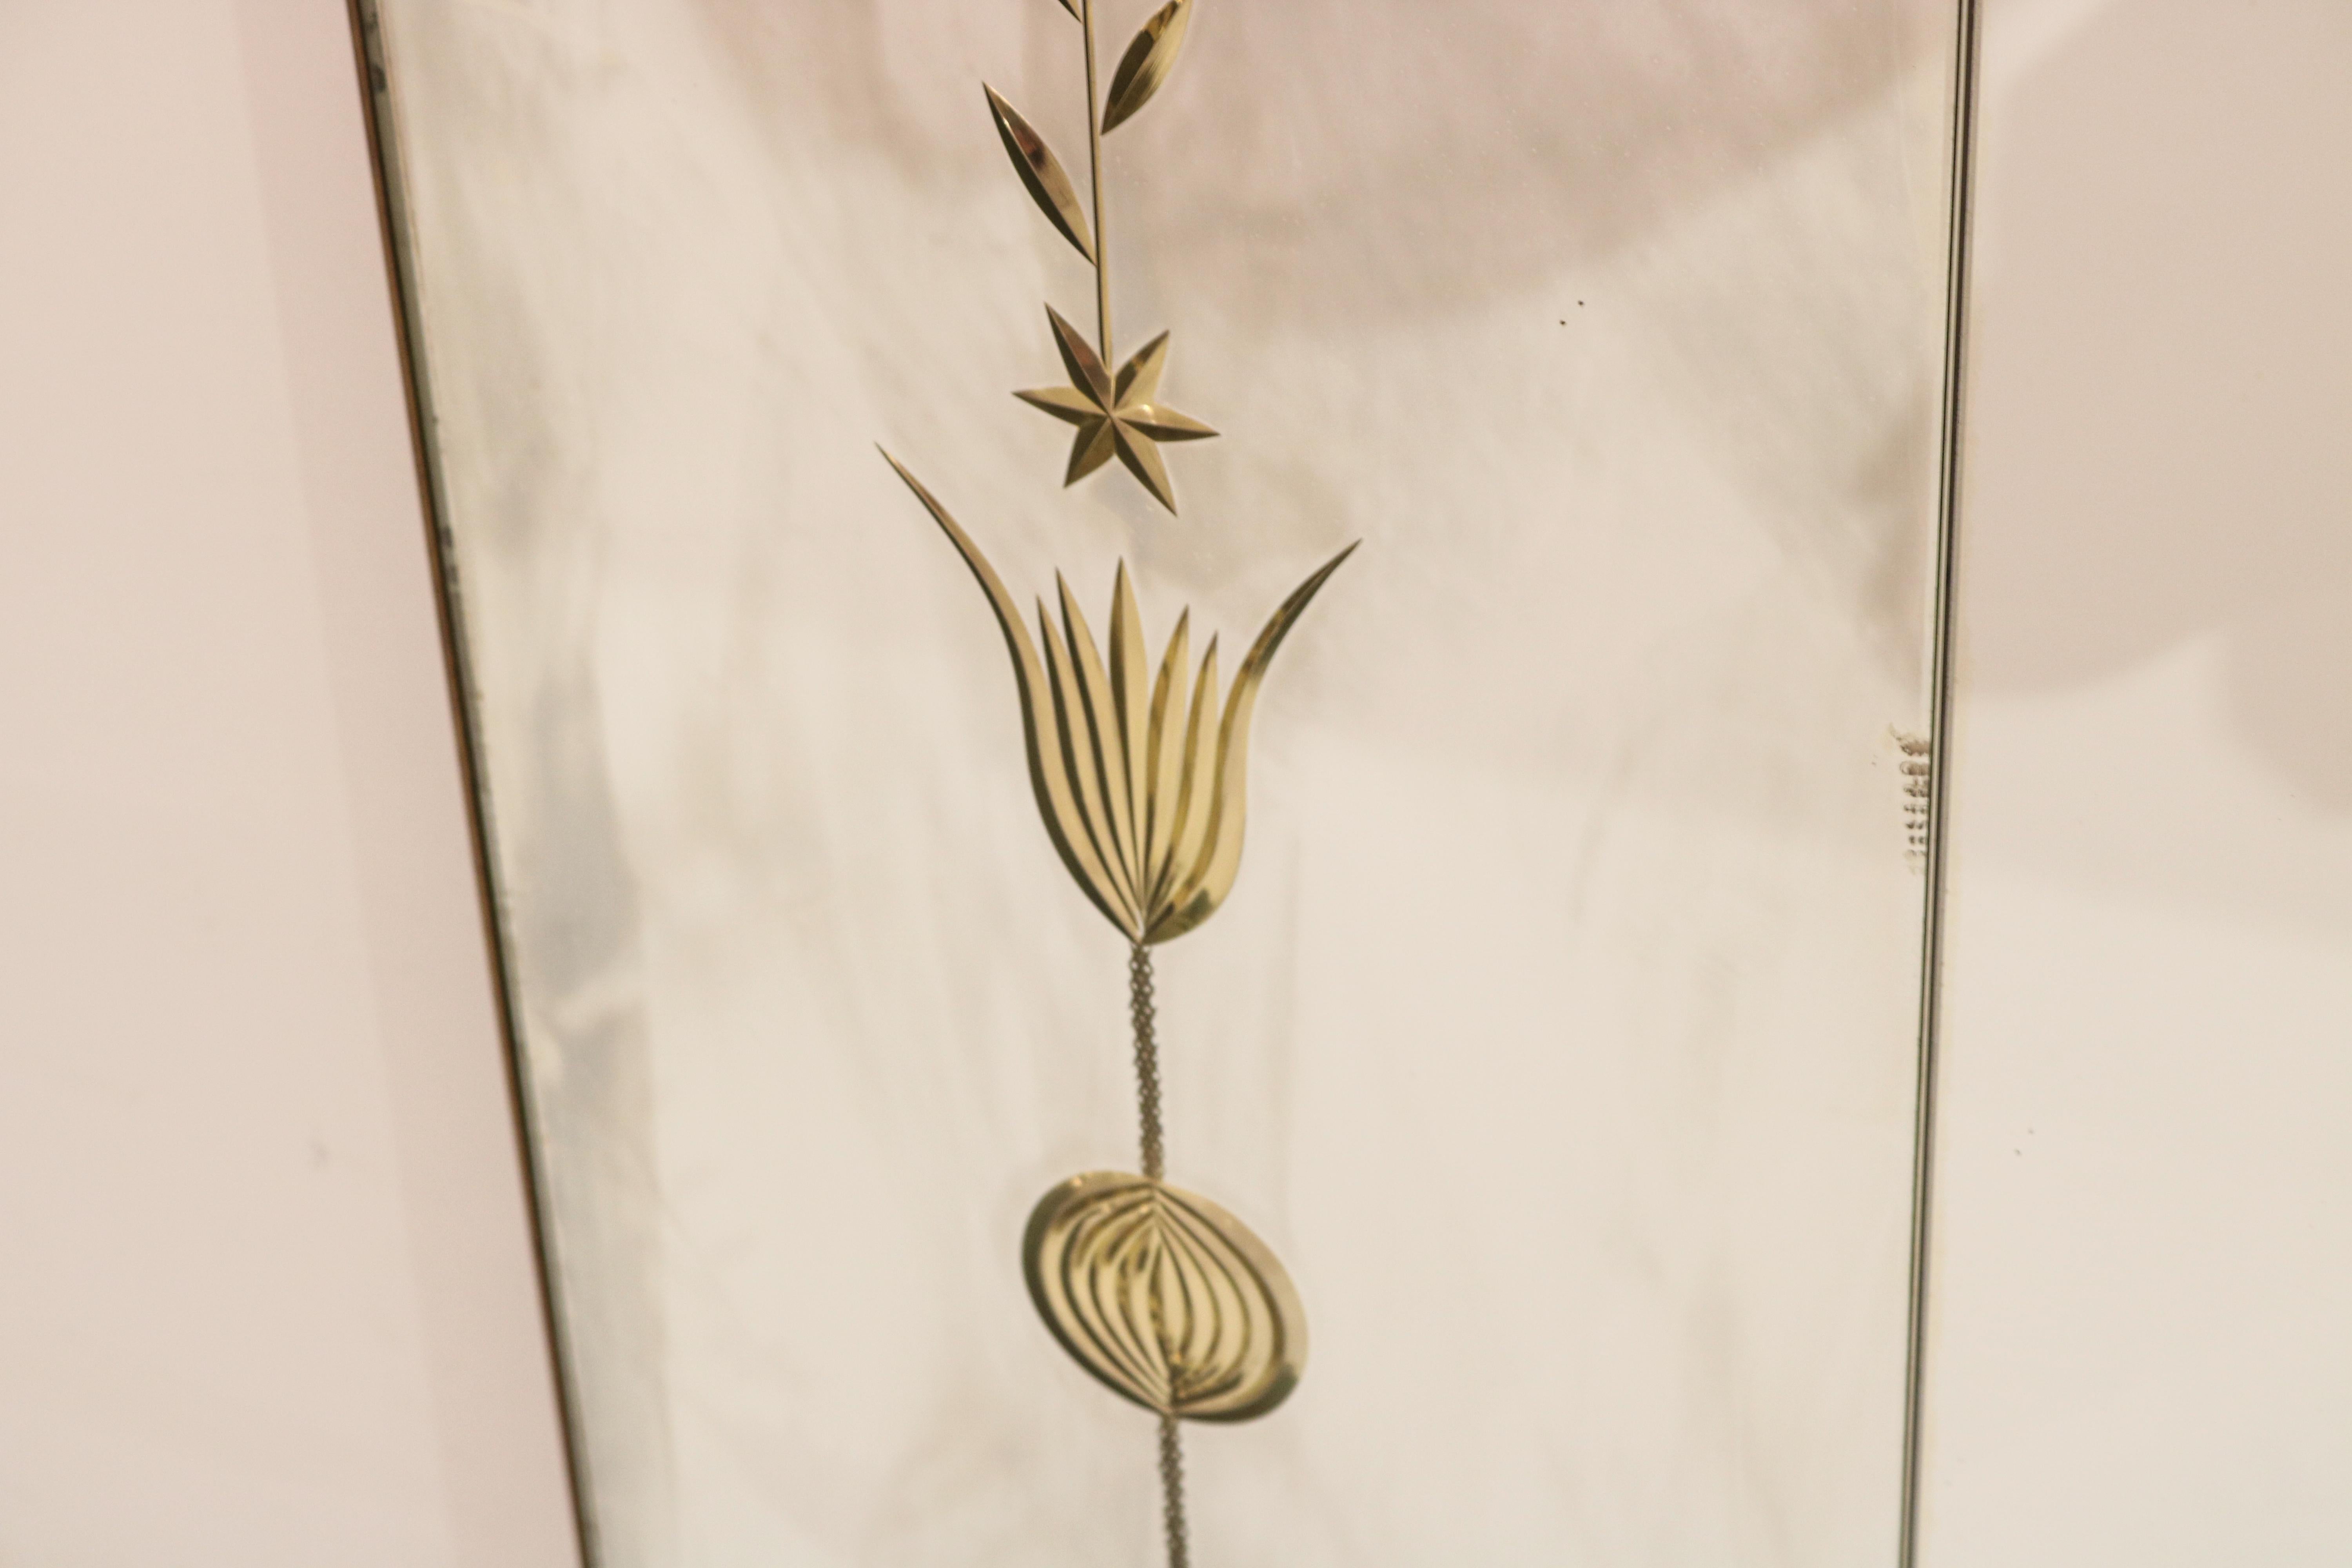 Horizontal Italian Modernist wall mirror. 
Three mirror panels surrounded by a patinated brass border
with floral inset brass details on the panels flanking the cental mirror.